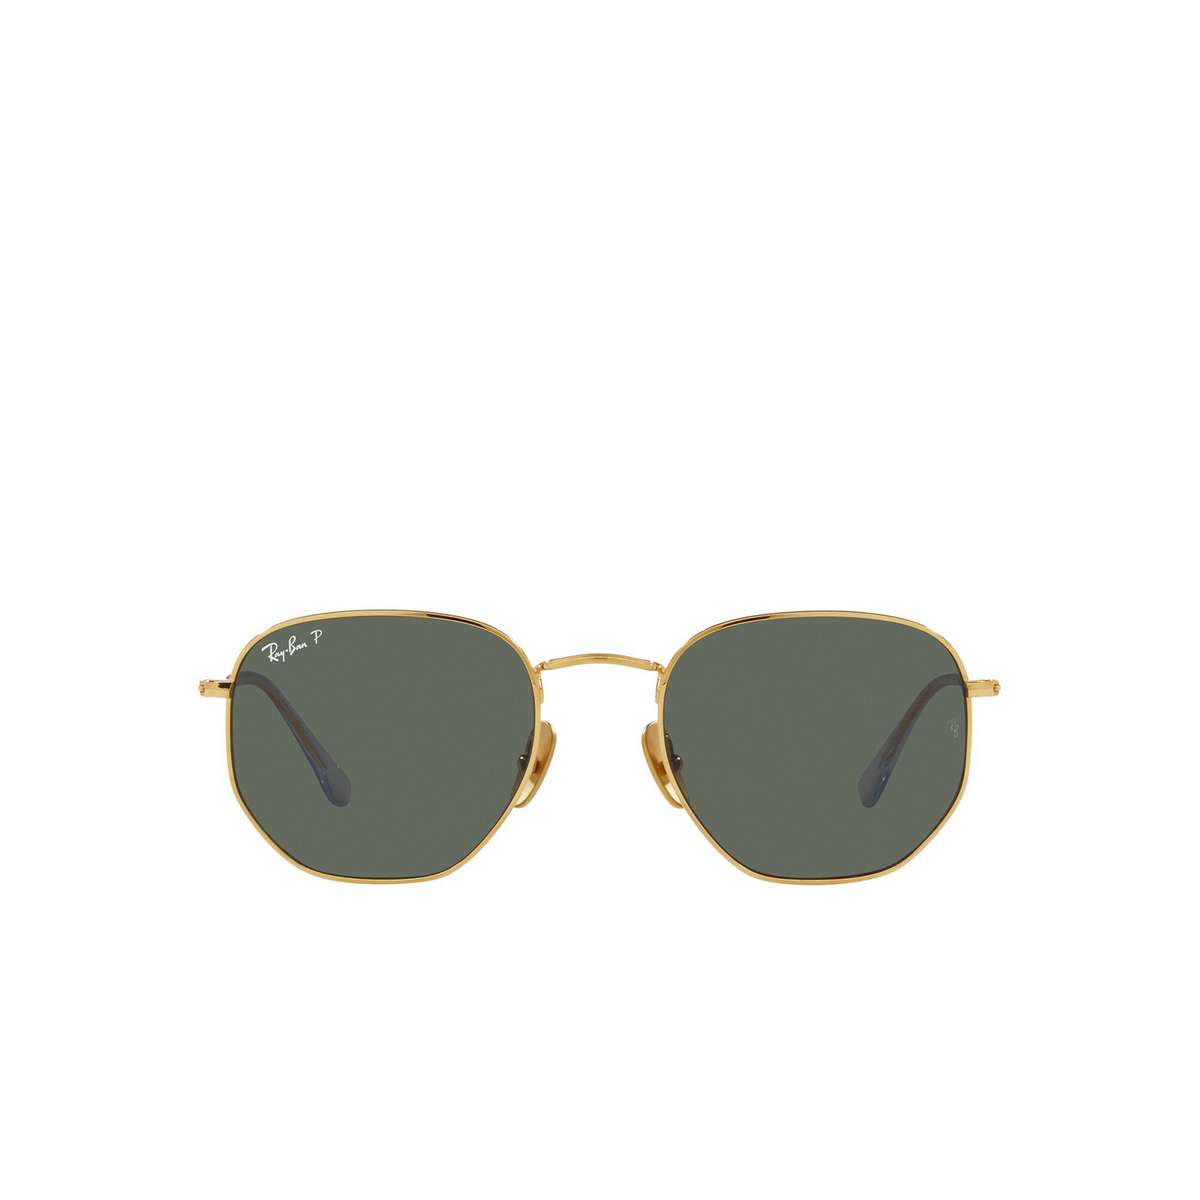 Ray-Ban HEXAGONAL Sunglasses 921658 Legend Gold - front view